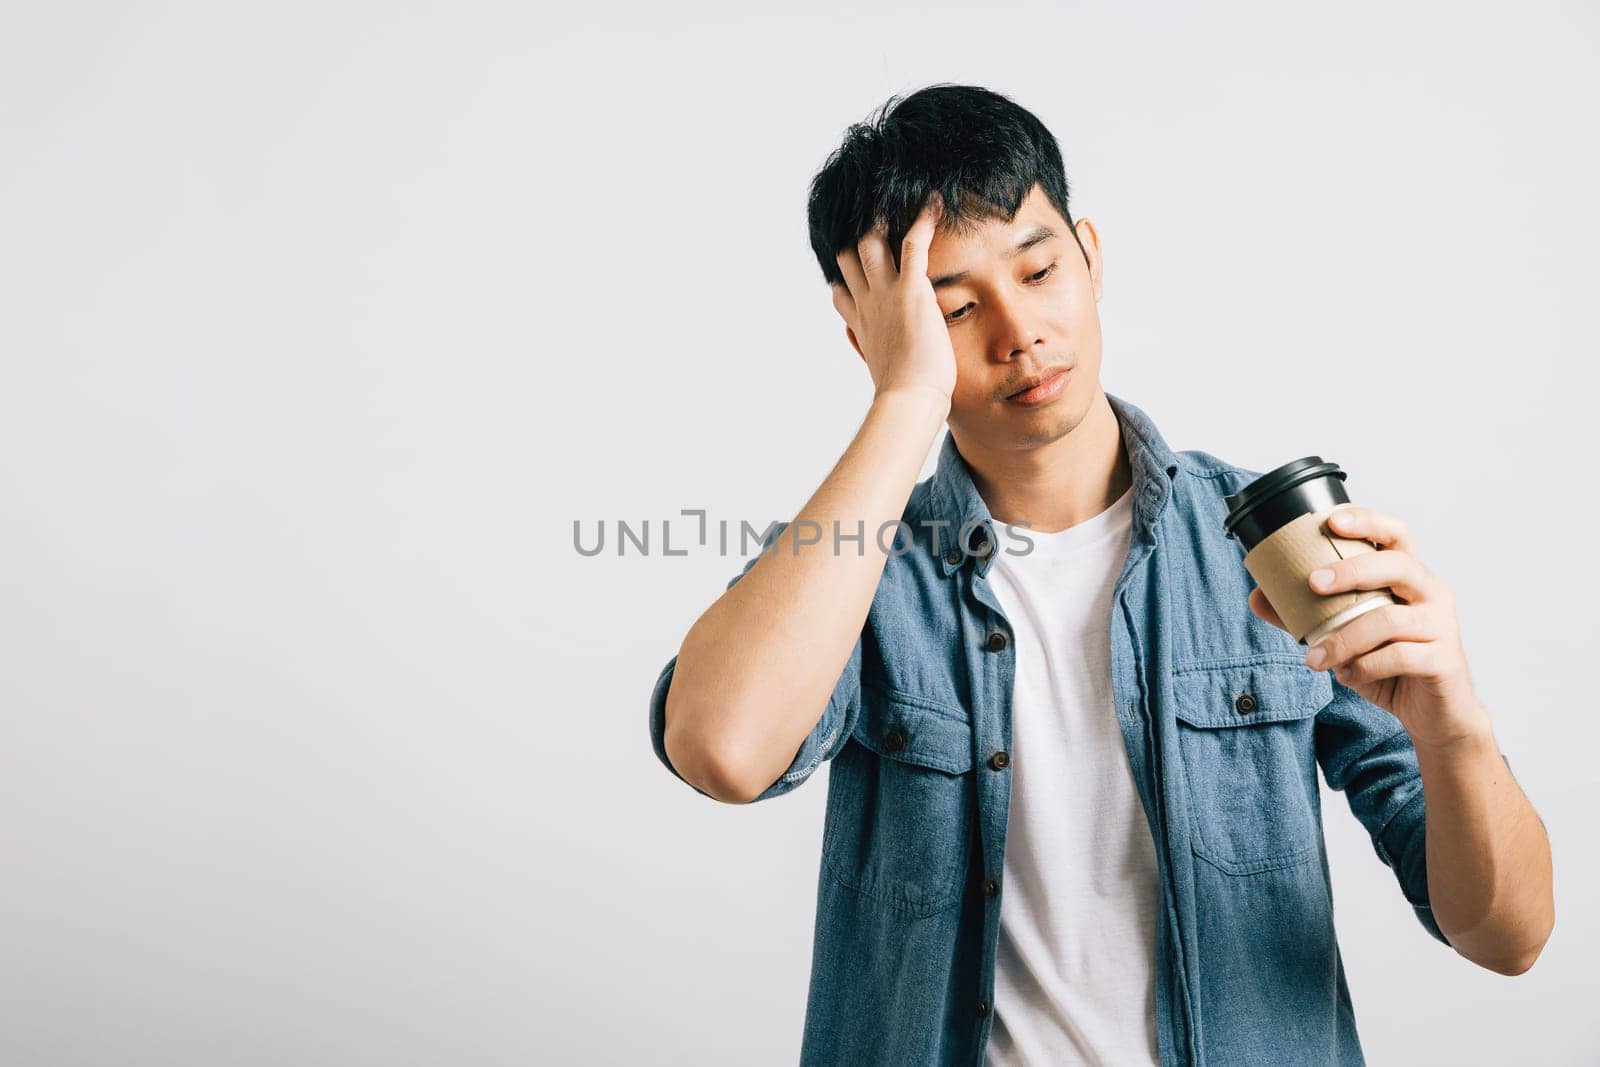 An overworked young man in despair, closing his eyes, holds a coffee cup by Sorapop